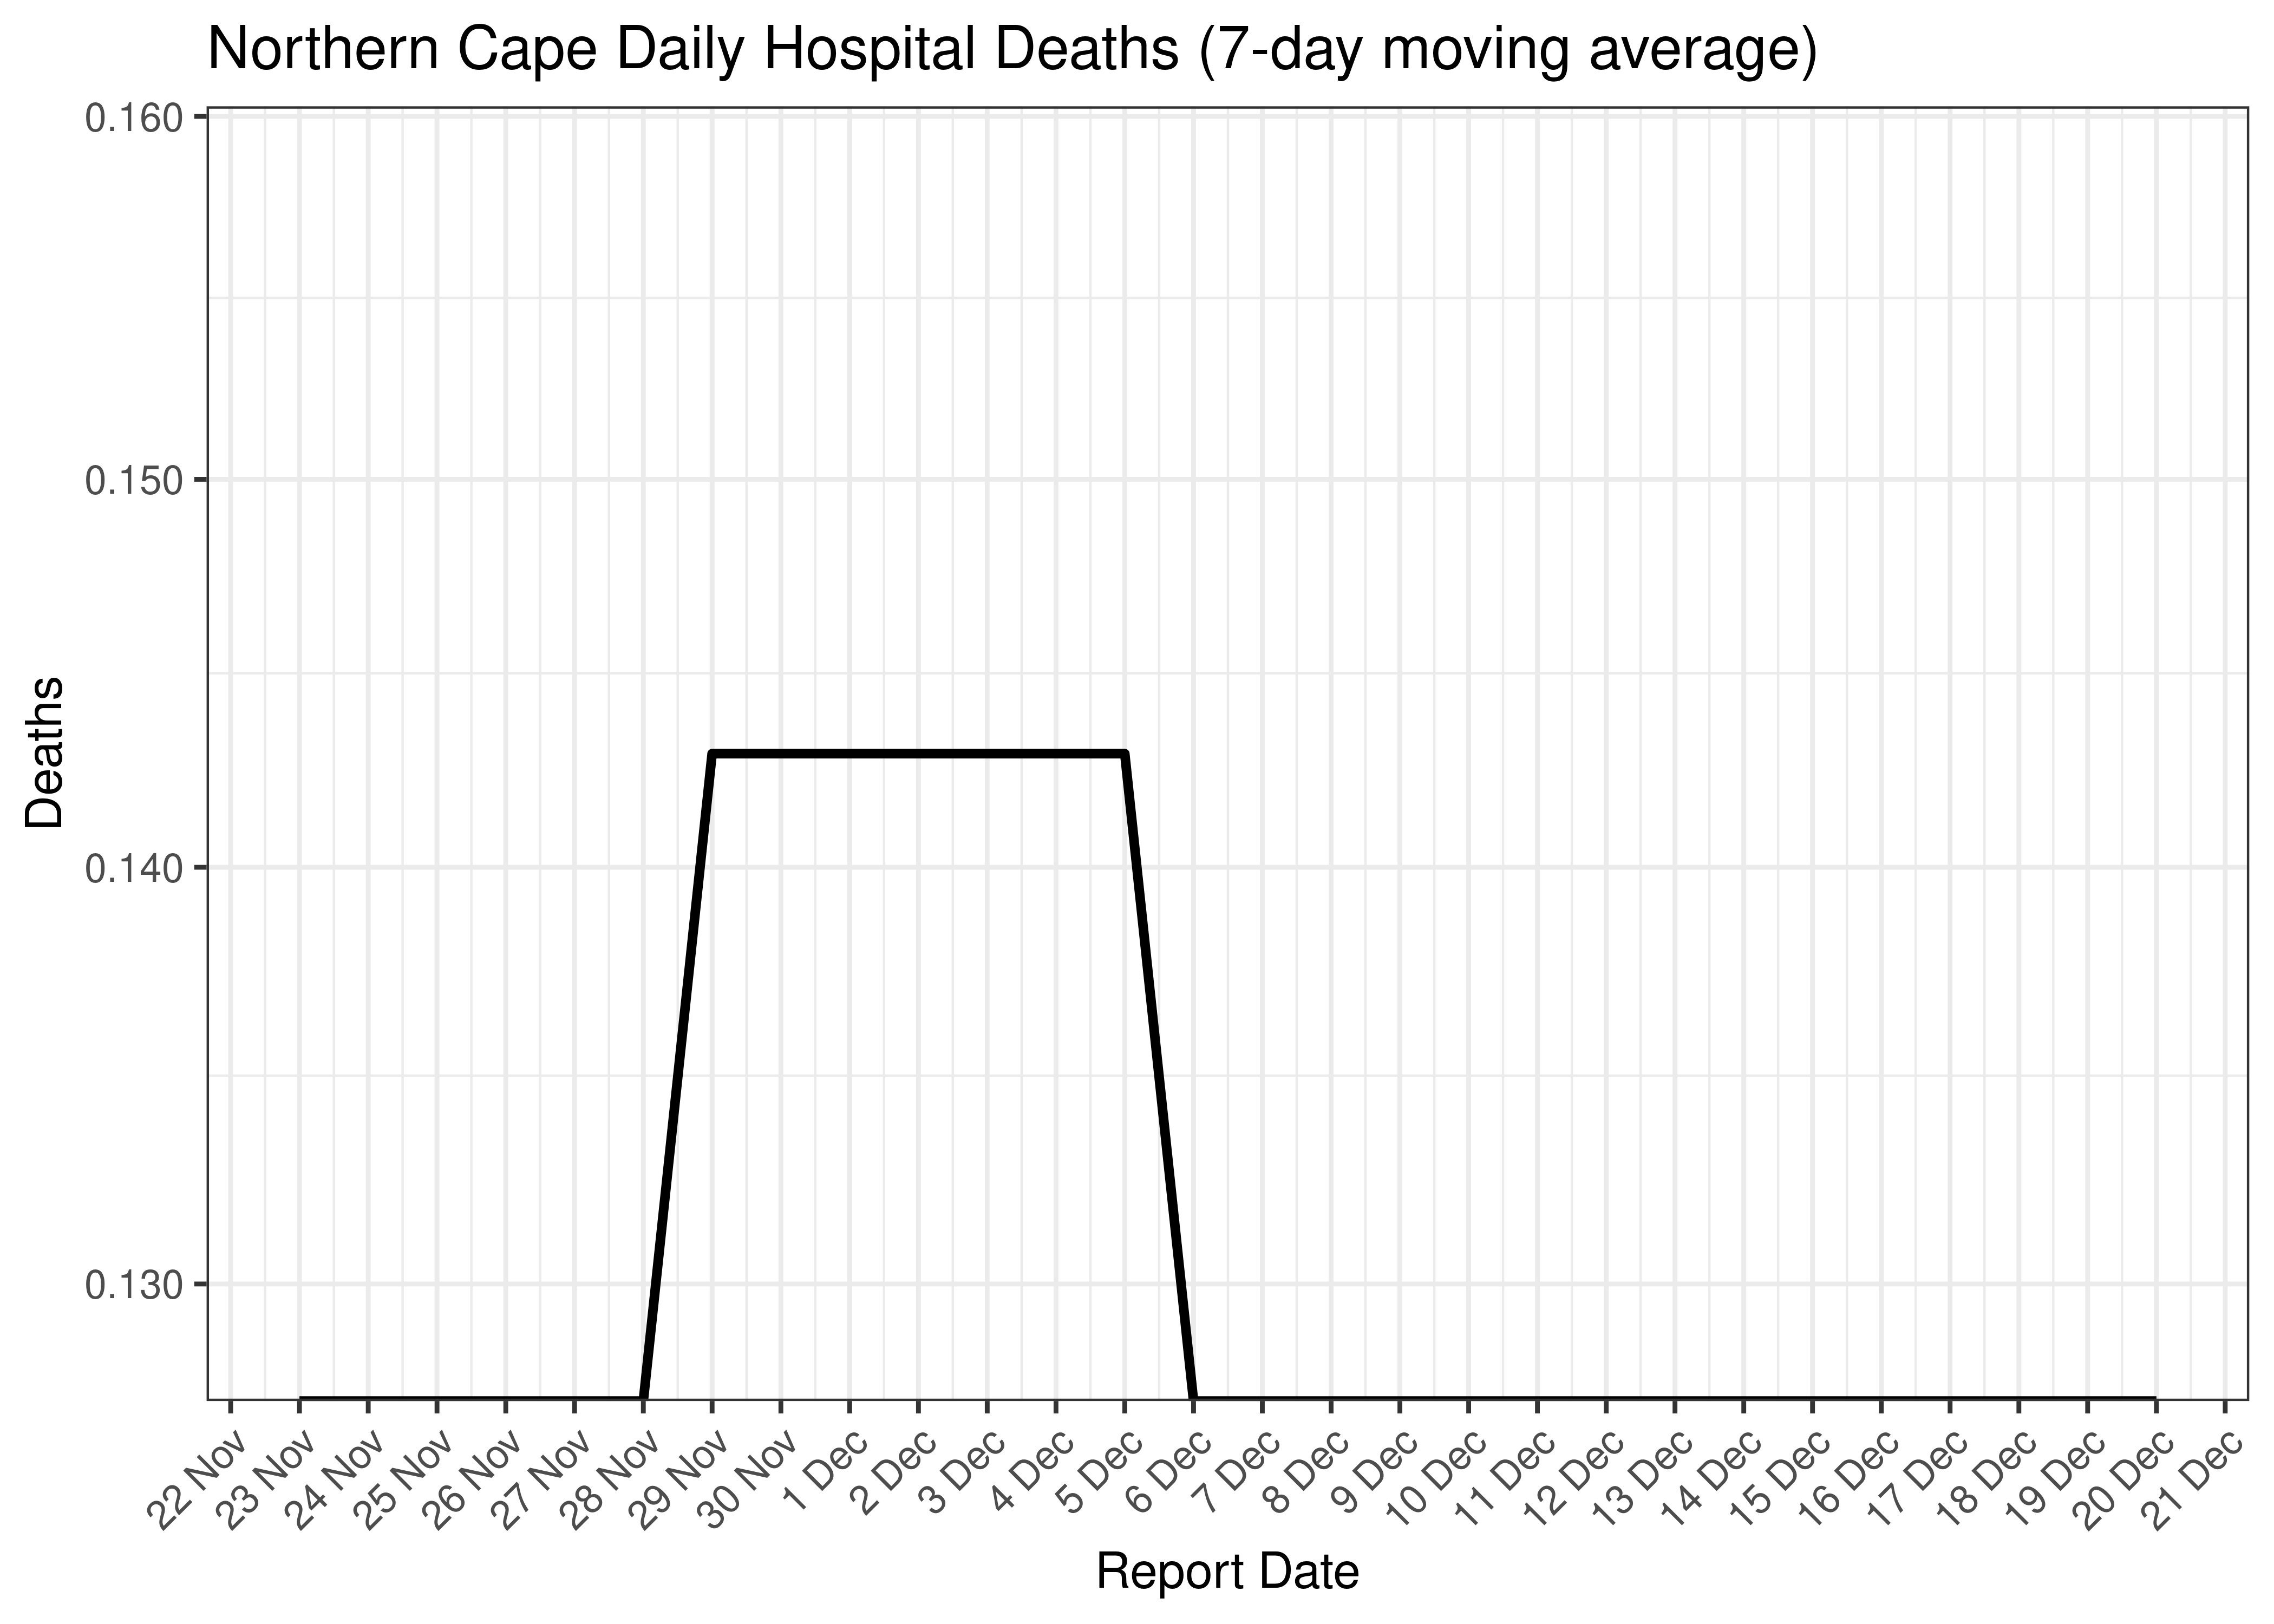 Northern Cape Daily Hospital Deaths for Last 30-days (7-day moving average)